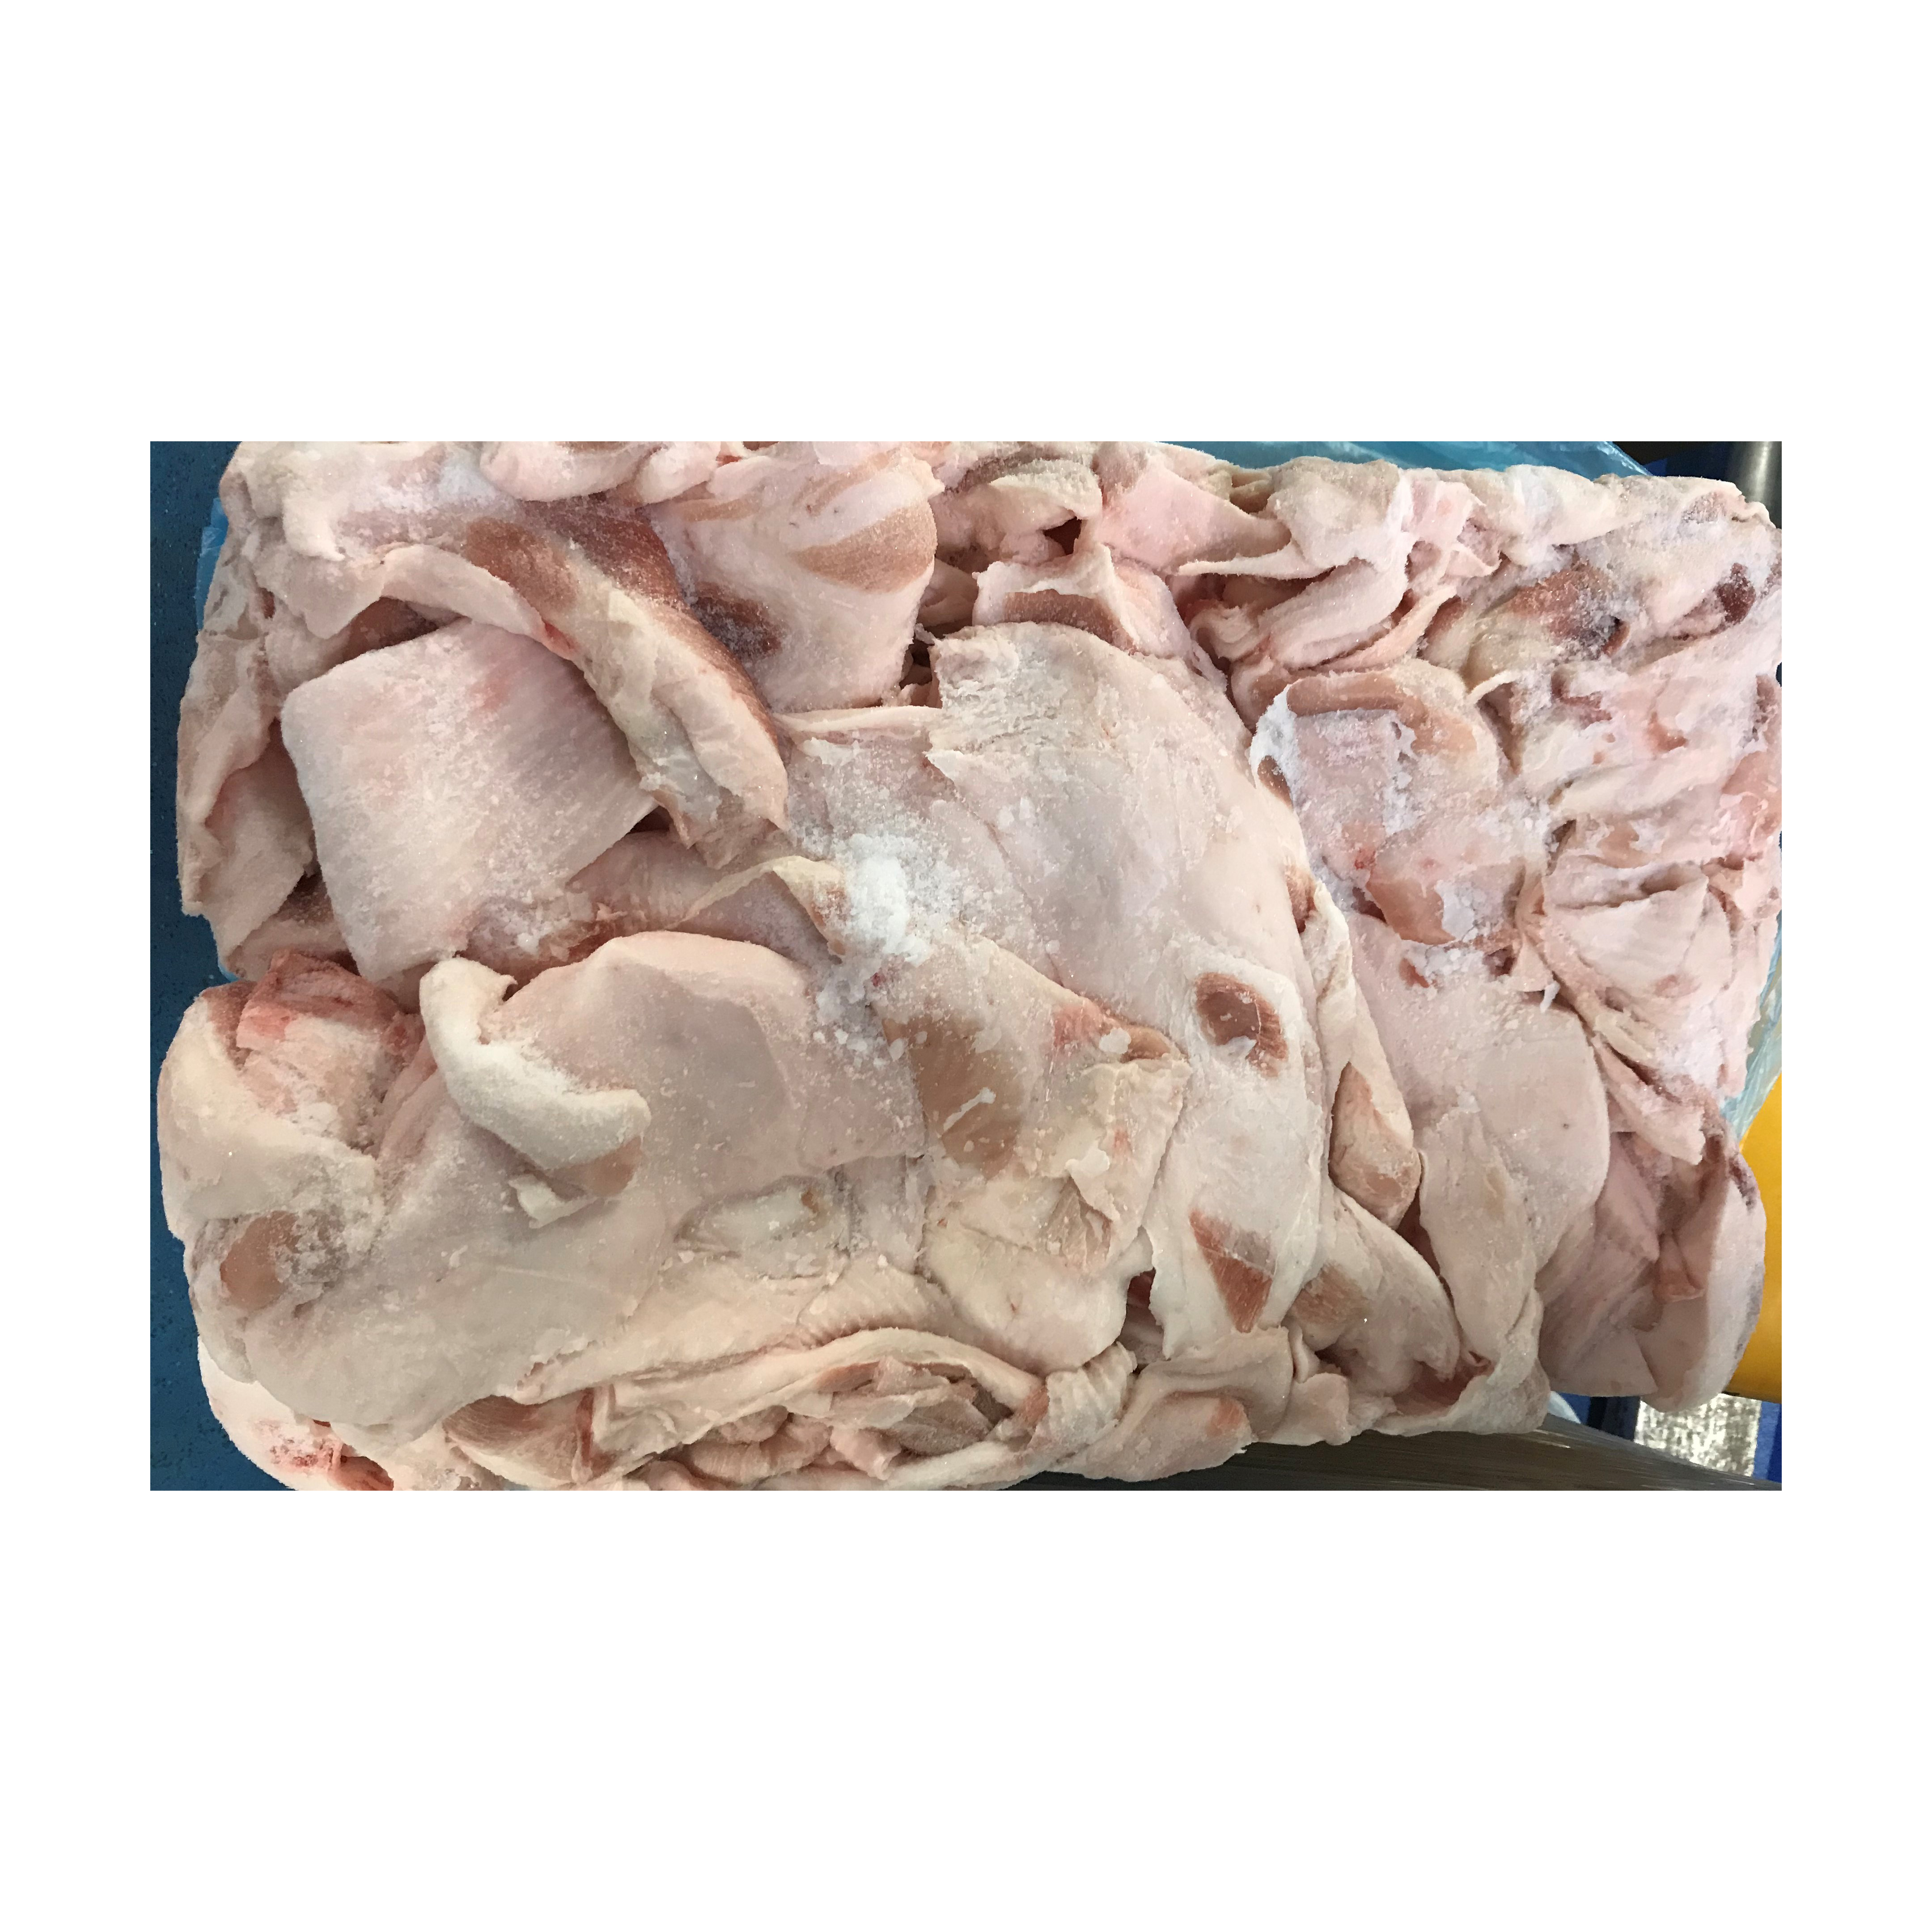 Buy Frozen Pork Cutting Fat directly For Sale